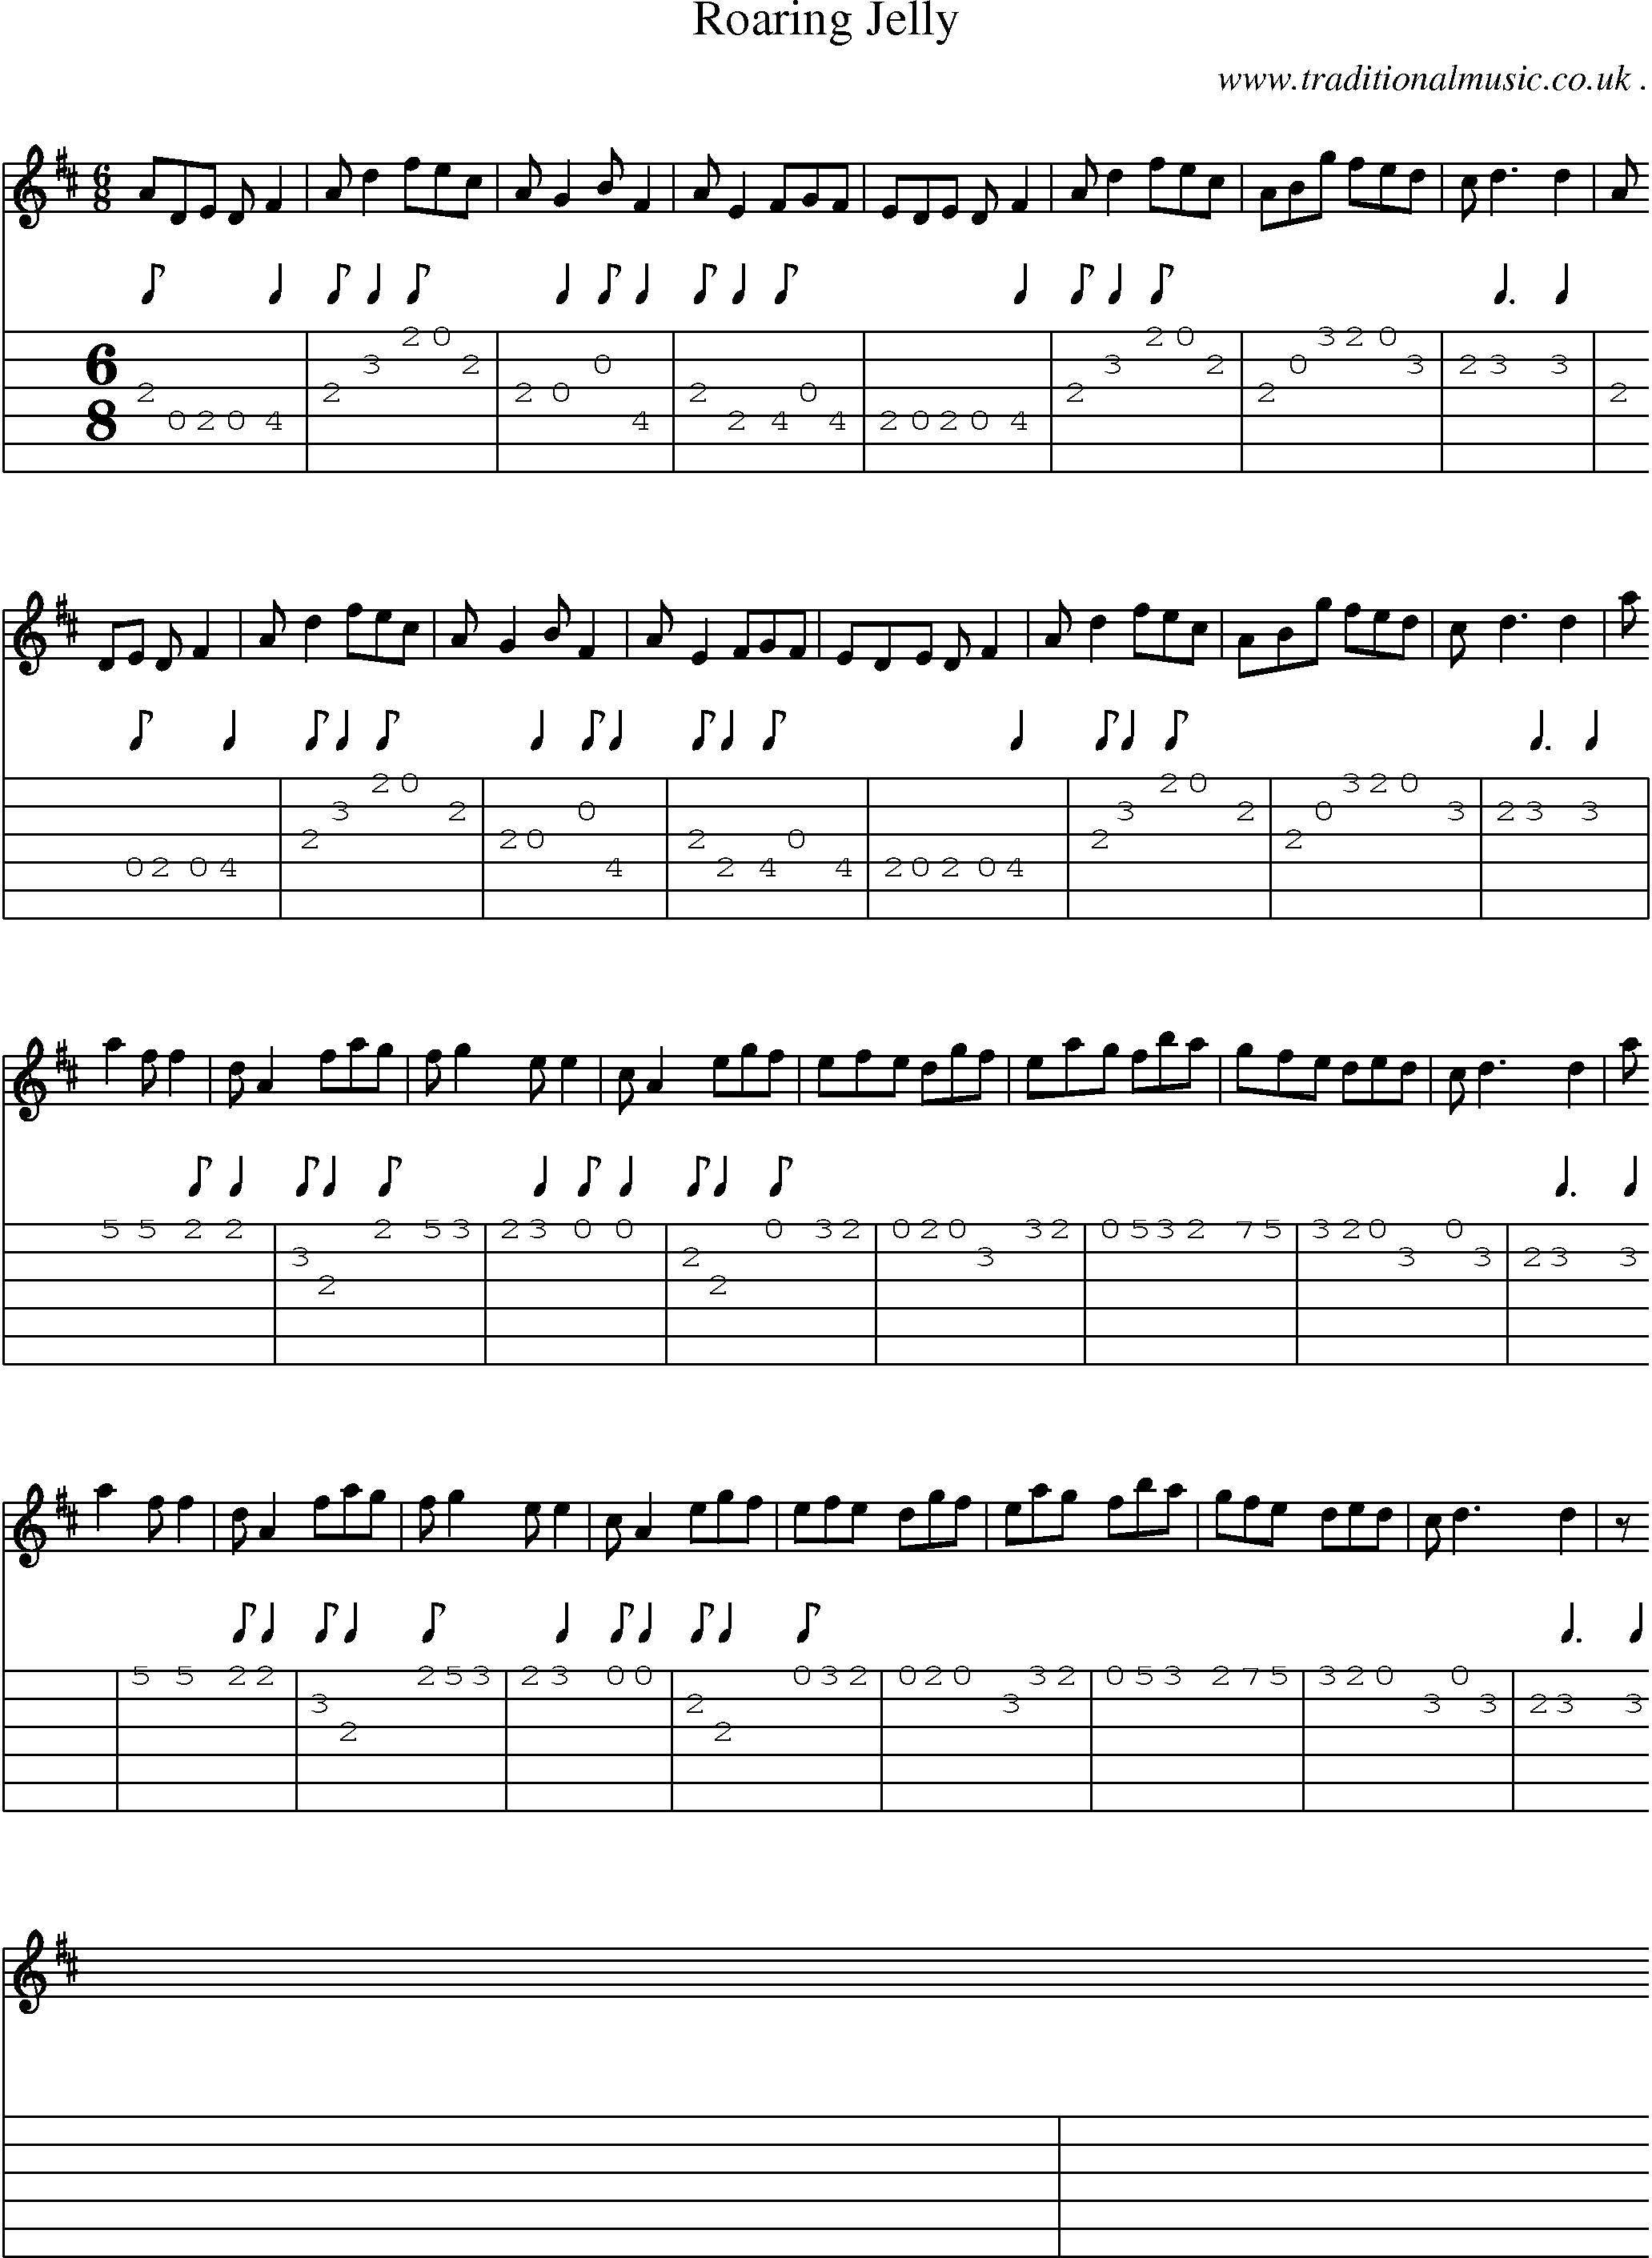 Sheet-Music and Guitar Tabs for Roaring Jelly